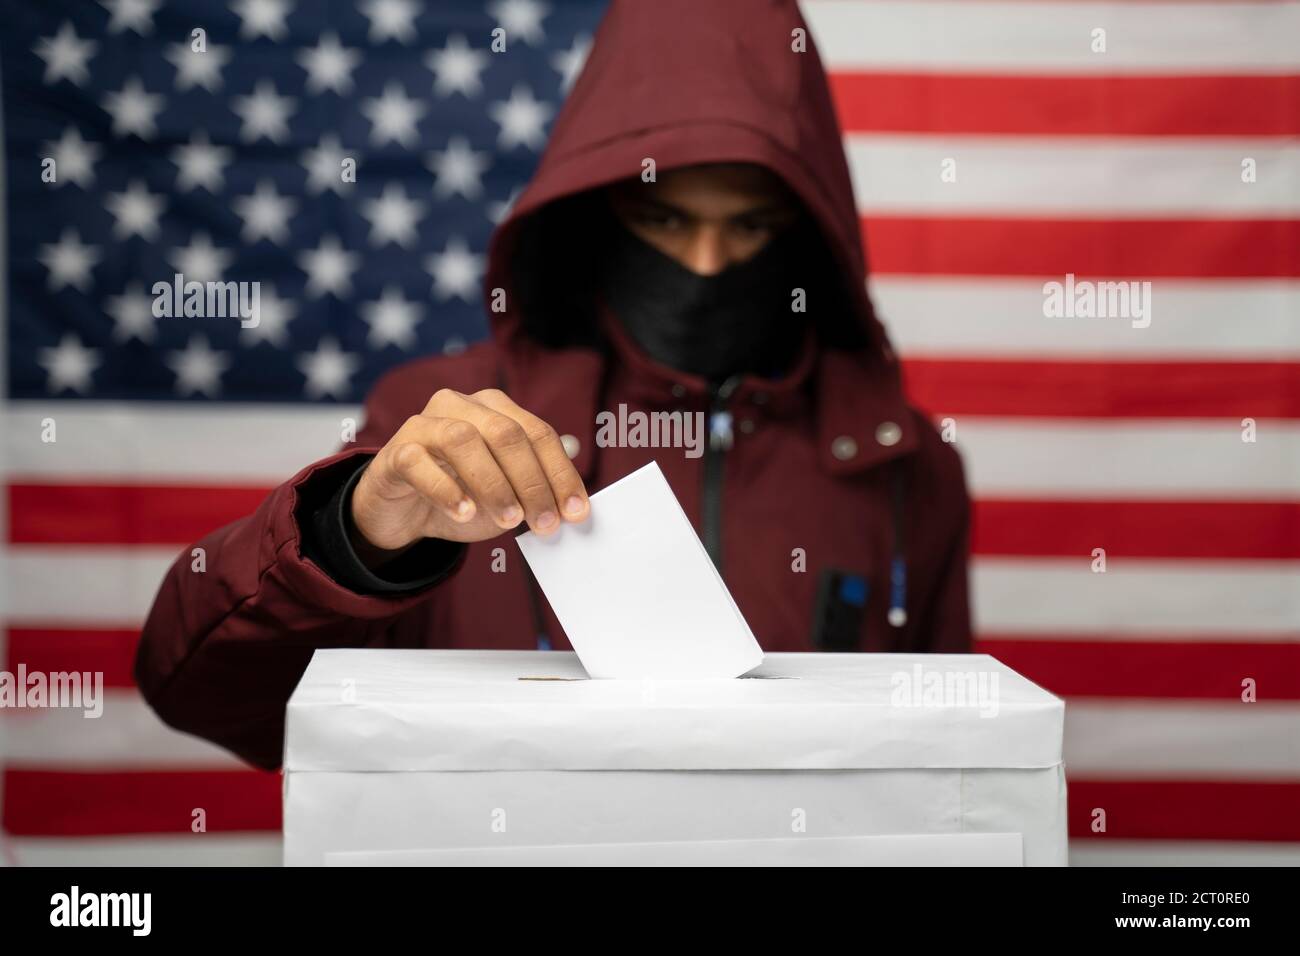 Man in hoodie with face covered casting Vote at polling booth with US falg as background - Concept of unkonwn voting or vote rigging in US elections Stock Photo